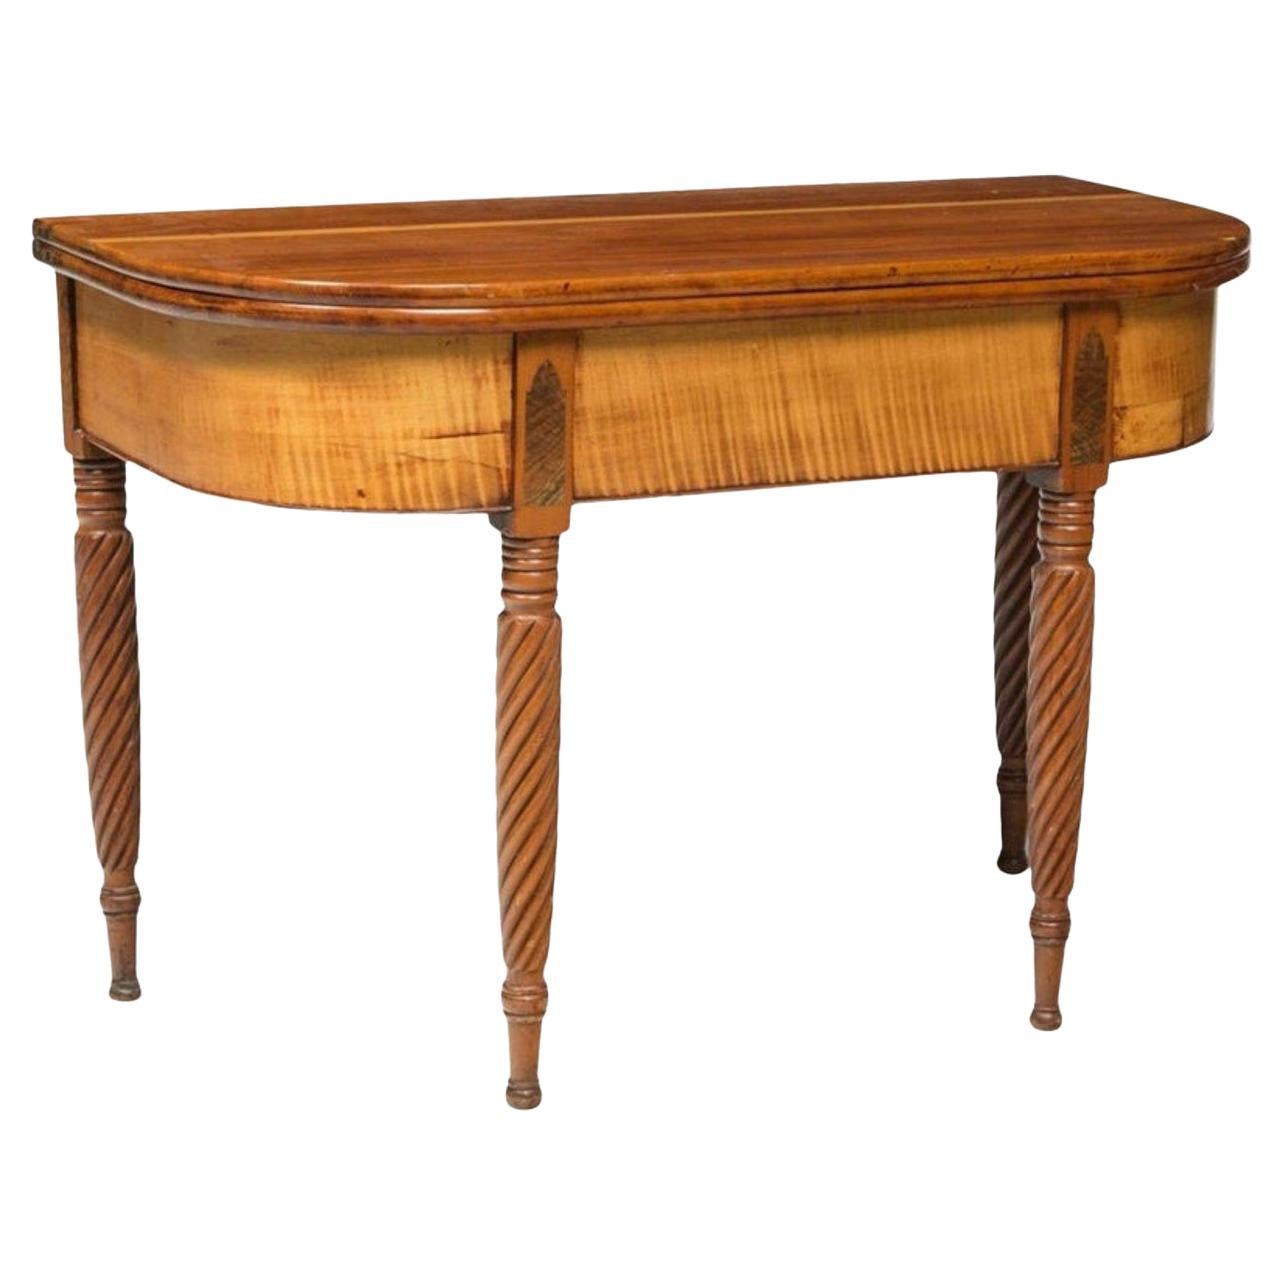 Period Baltimore Classical Curly Maple Console Games Table